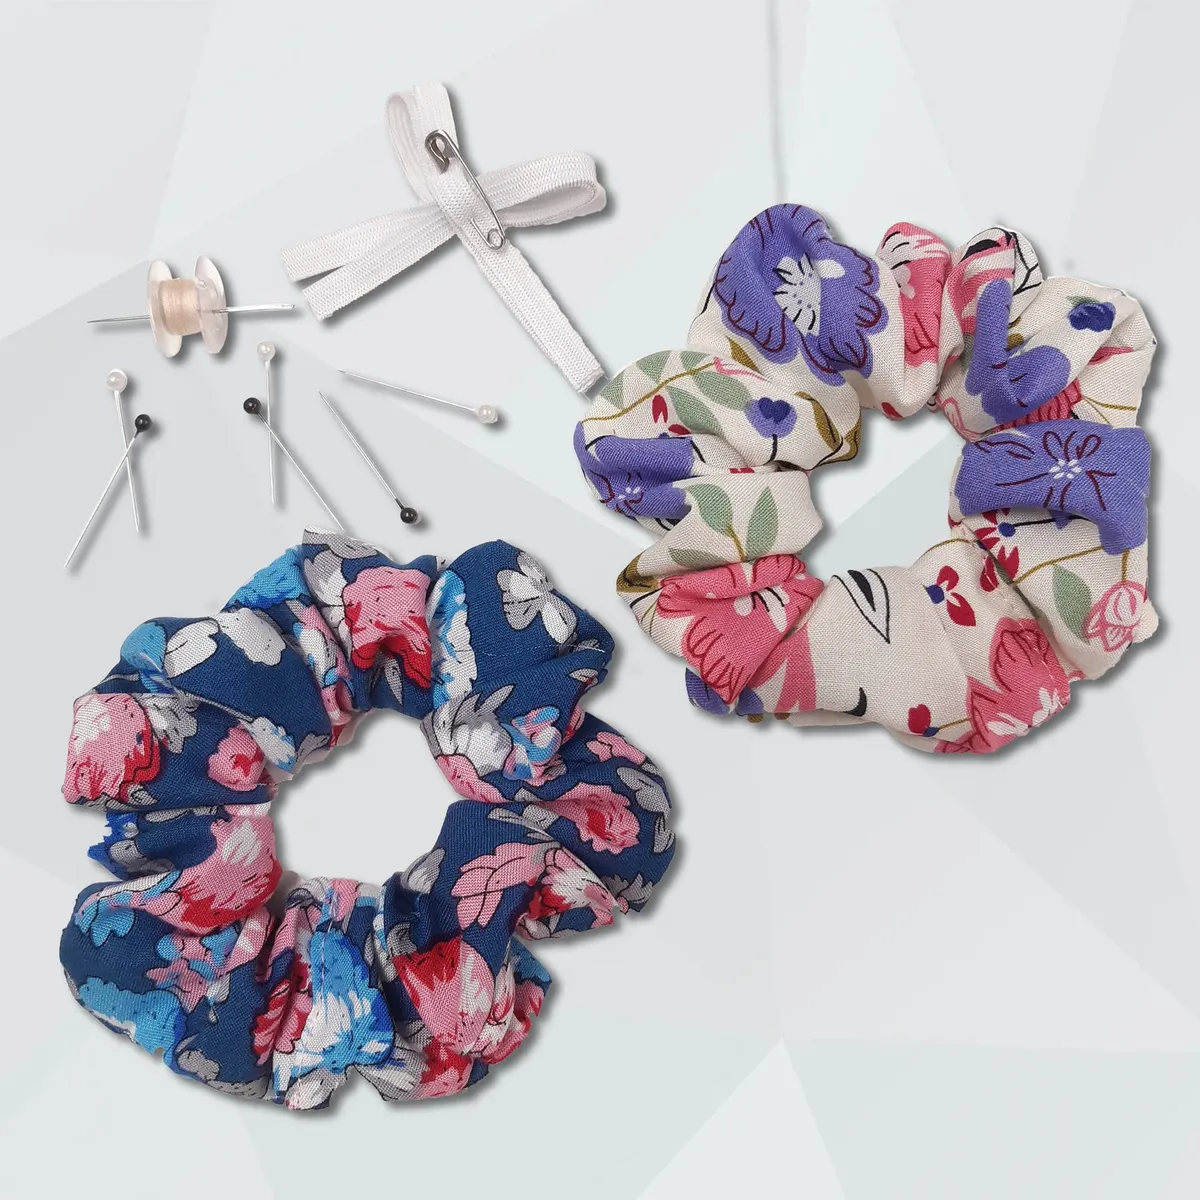 Learn to sew a scrunchie sewing kit